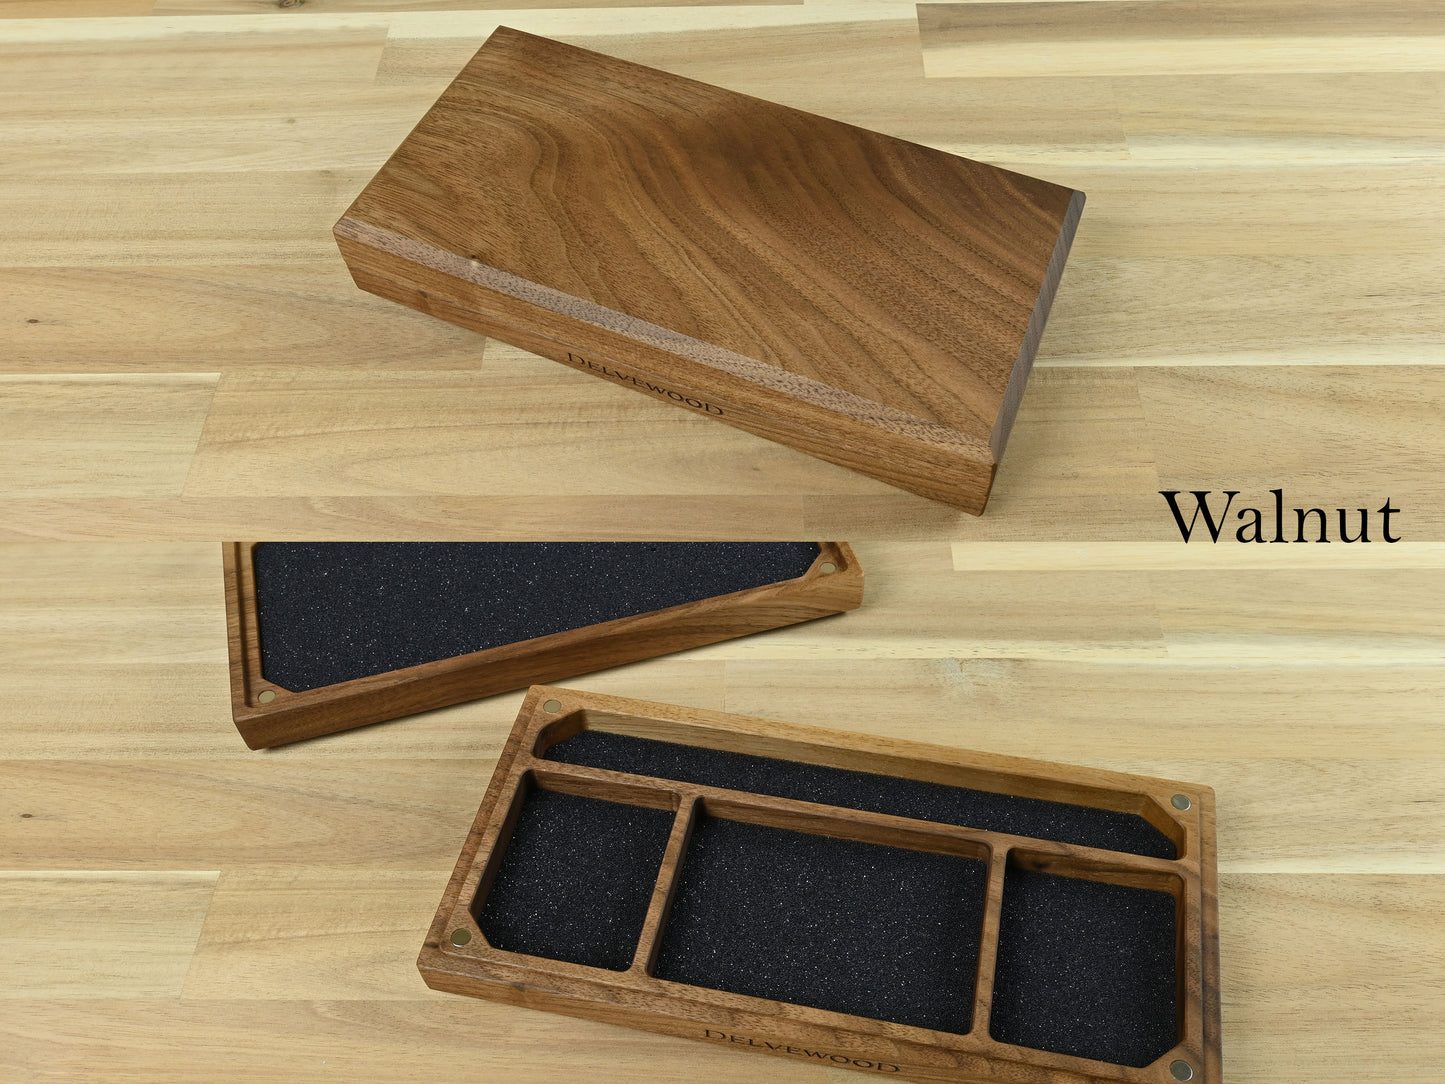 walnut example of Delver Dice Box and Tray for dnd rpg